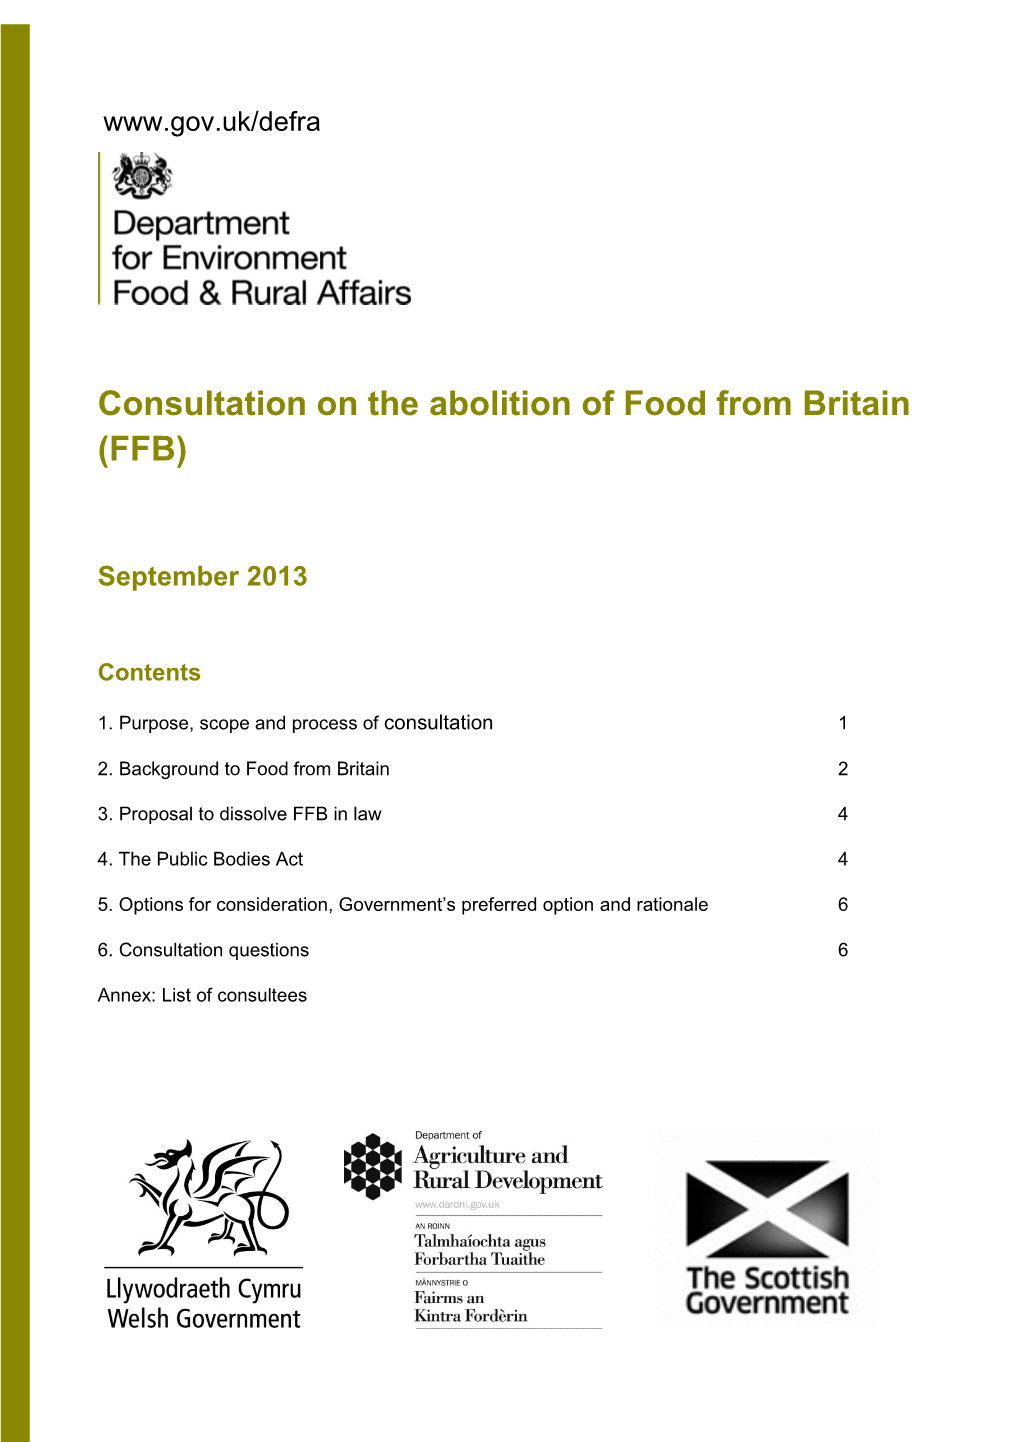 Consultation on the Abolition of Food from Britain (FFB)